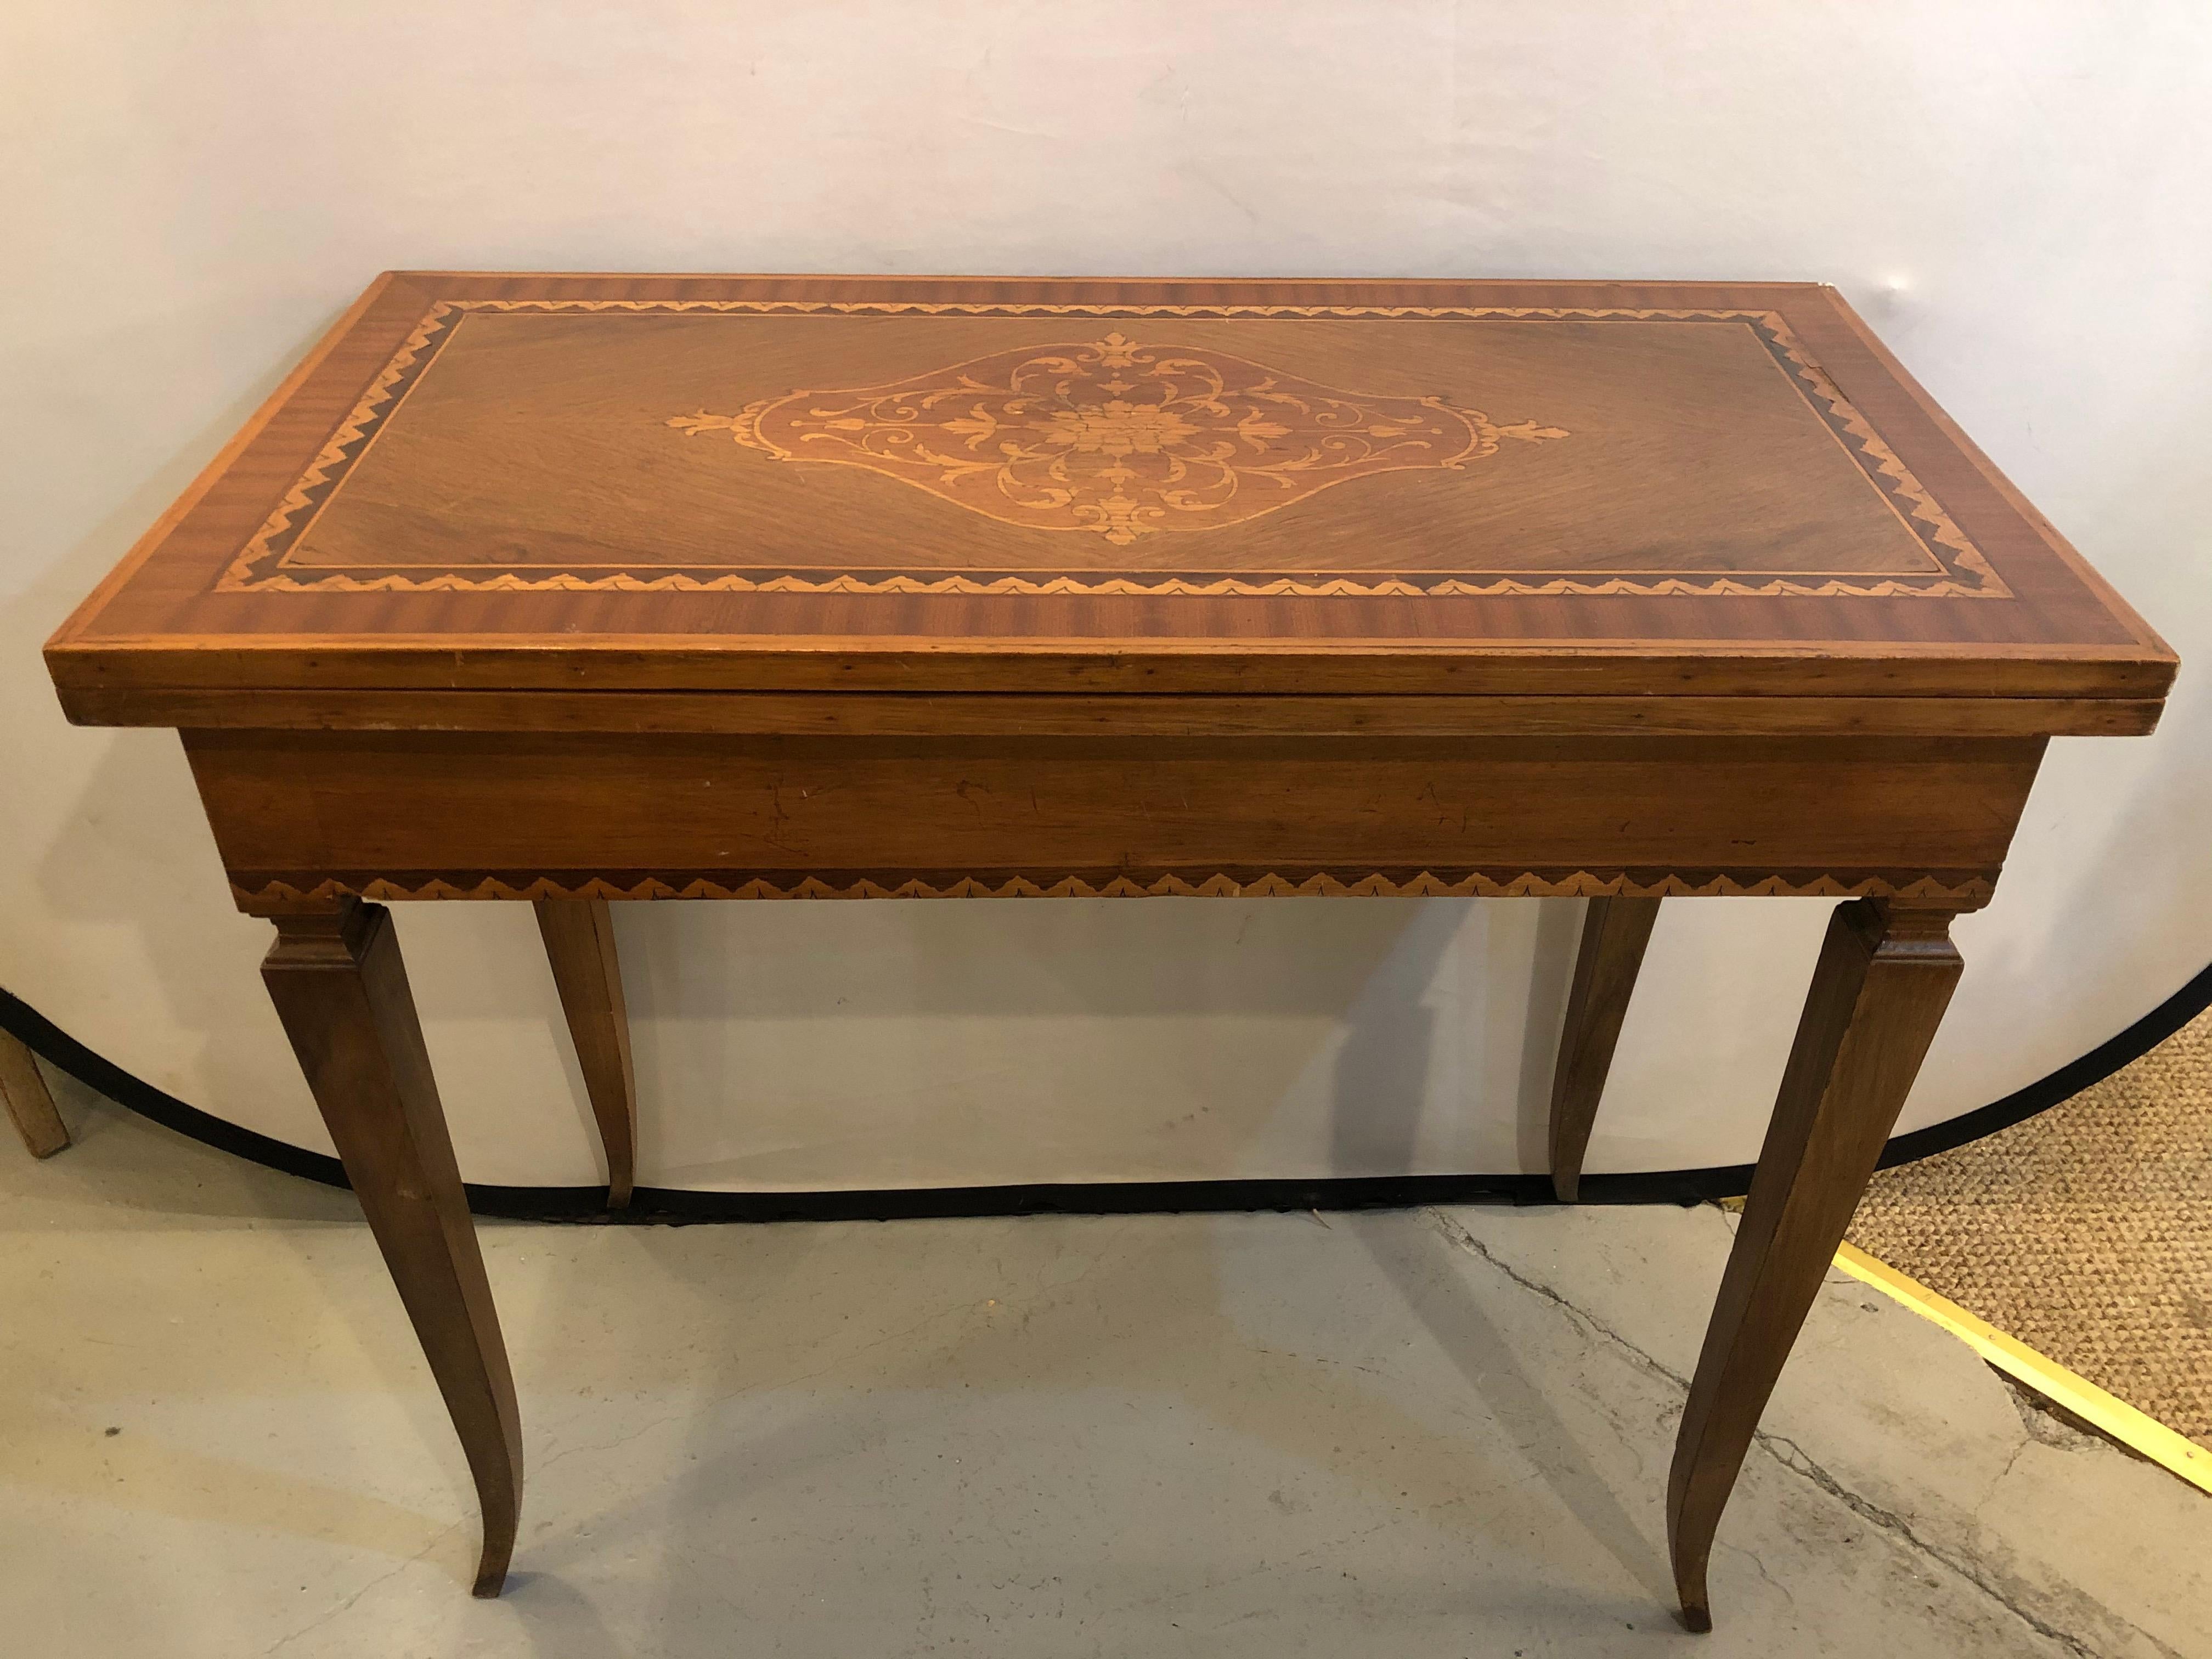 Italian inlaid folding game or card table. This finely inlaid circa 1920s game or card flip top table is wonderfully inlaid. The top on curved tapering legs leading to an inlaid border apron supporting a flip tabletop that can ope to sit four